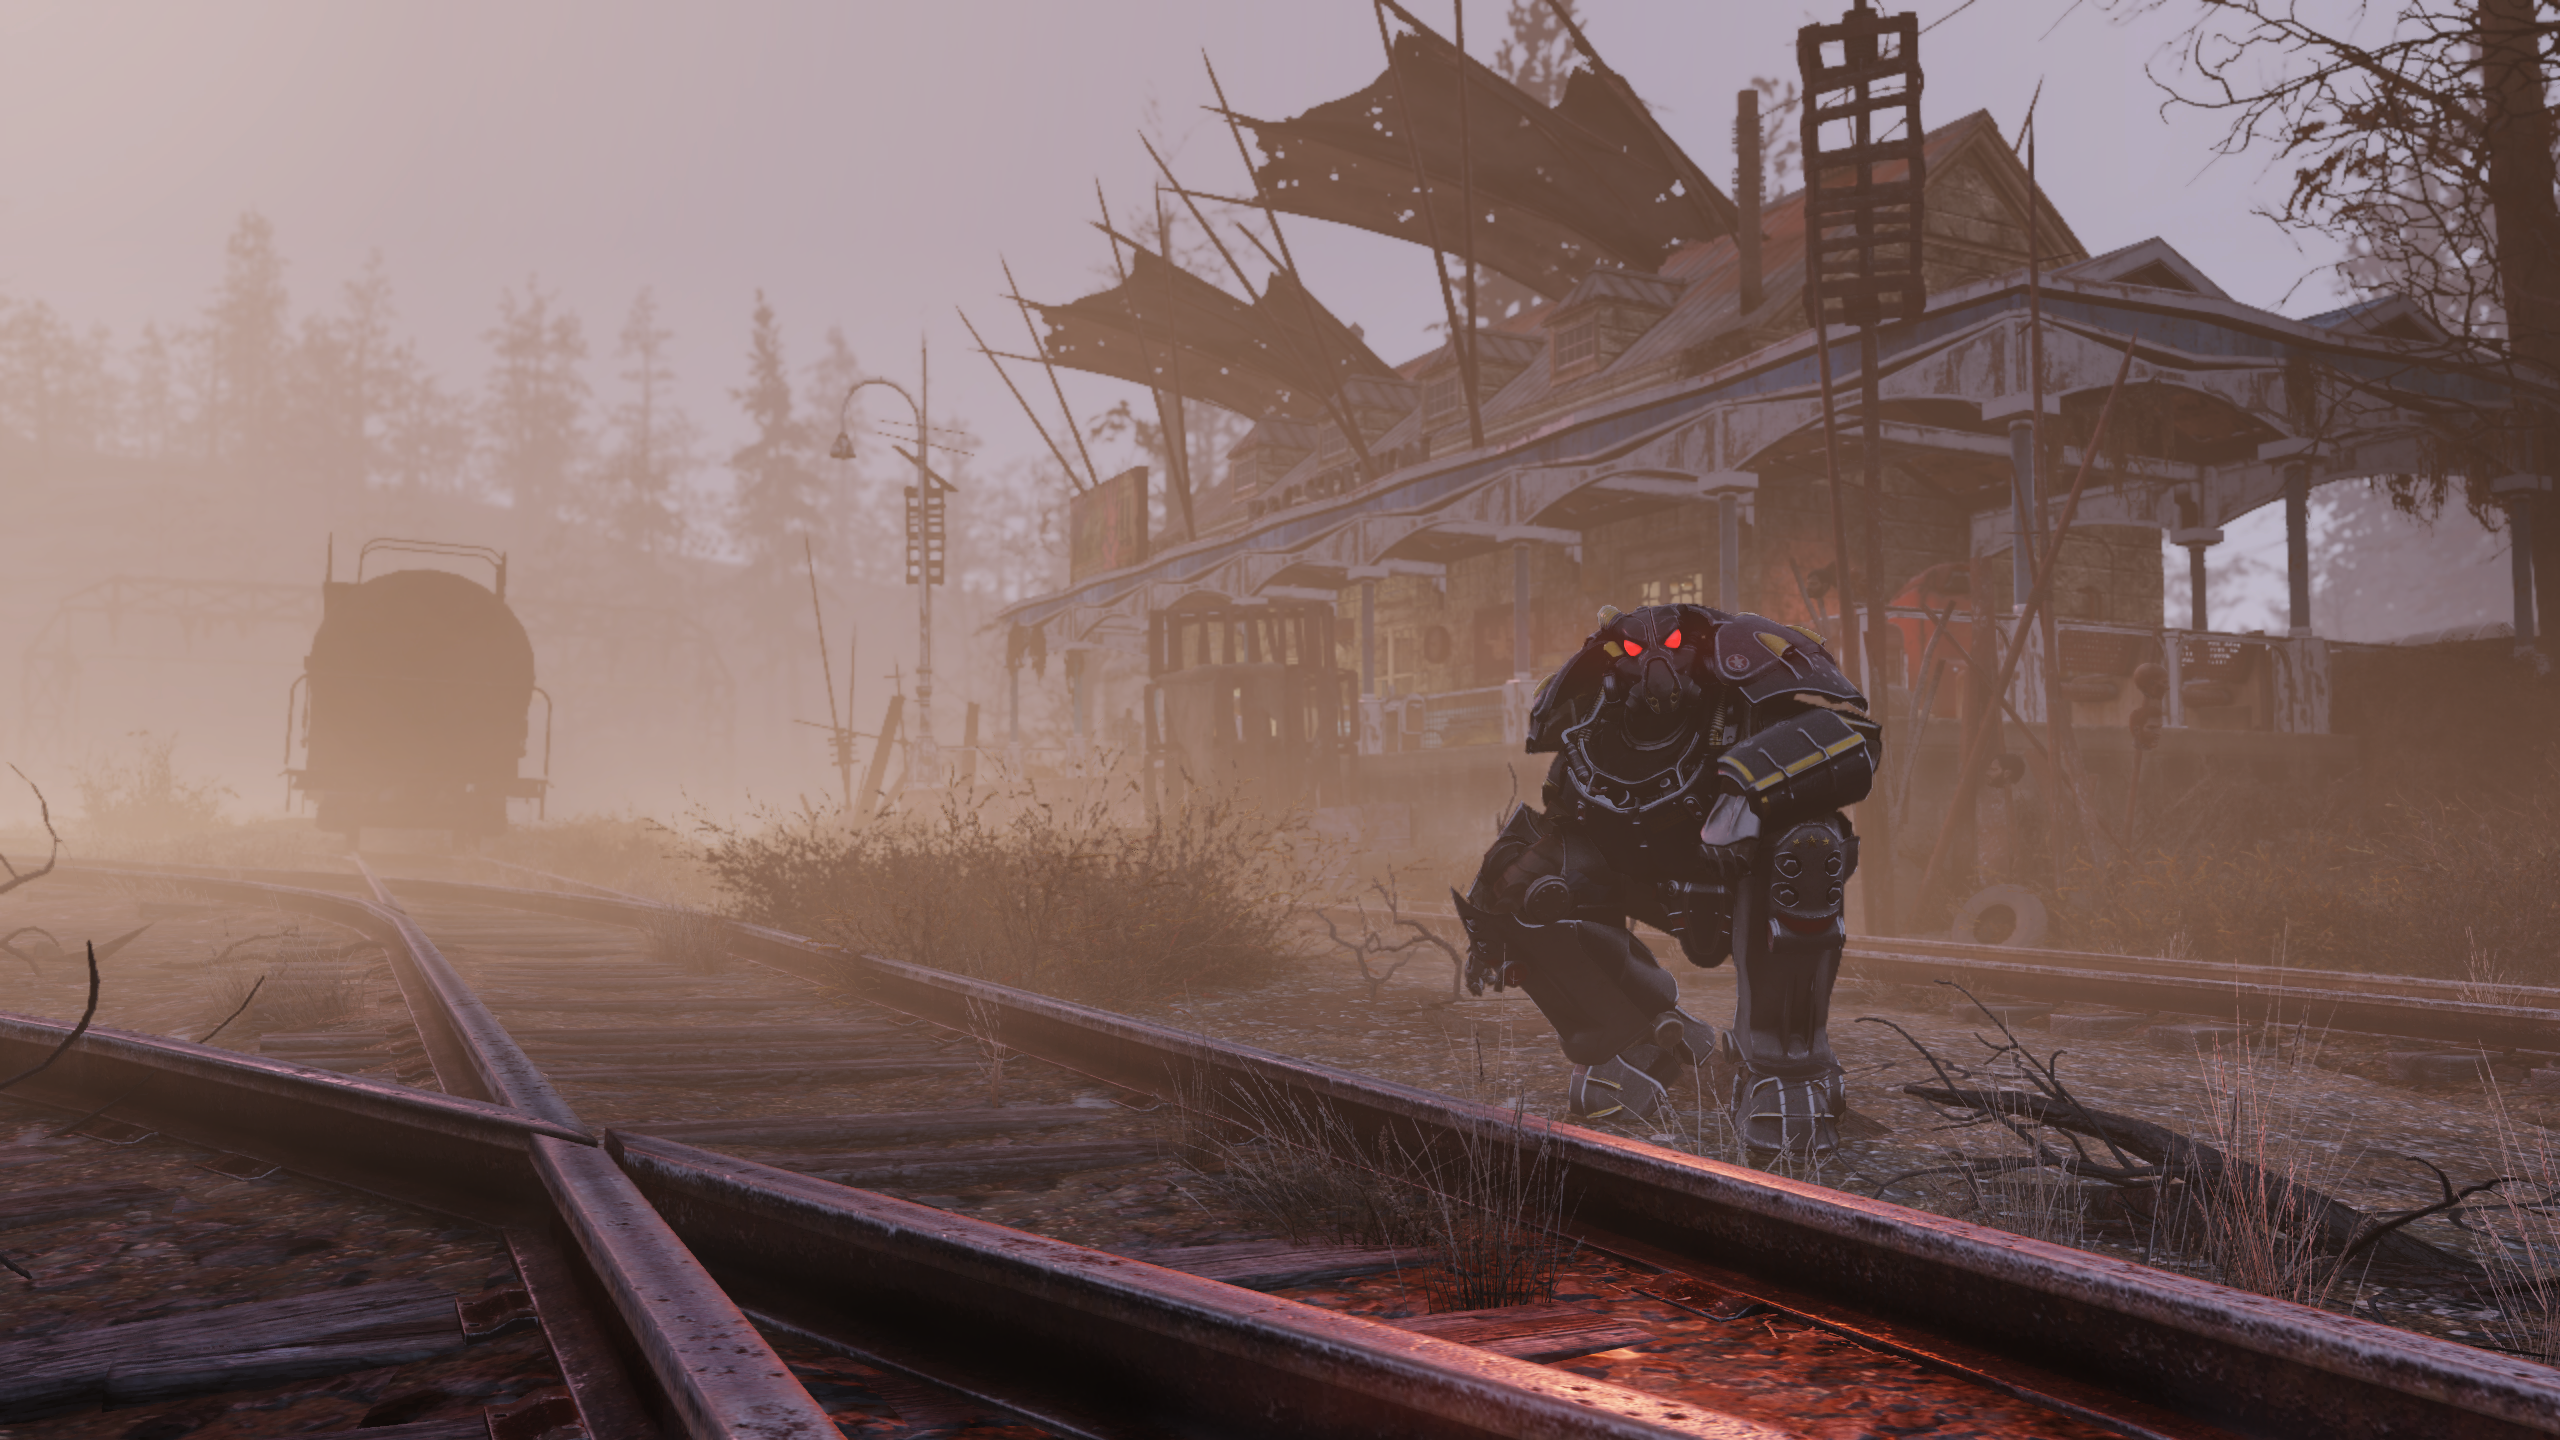 Metacritic Reviews Rip Fallout 76 To Shreds For Its Bugs And Similarities  To Fallout 4